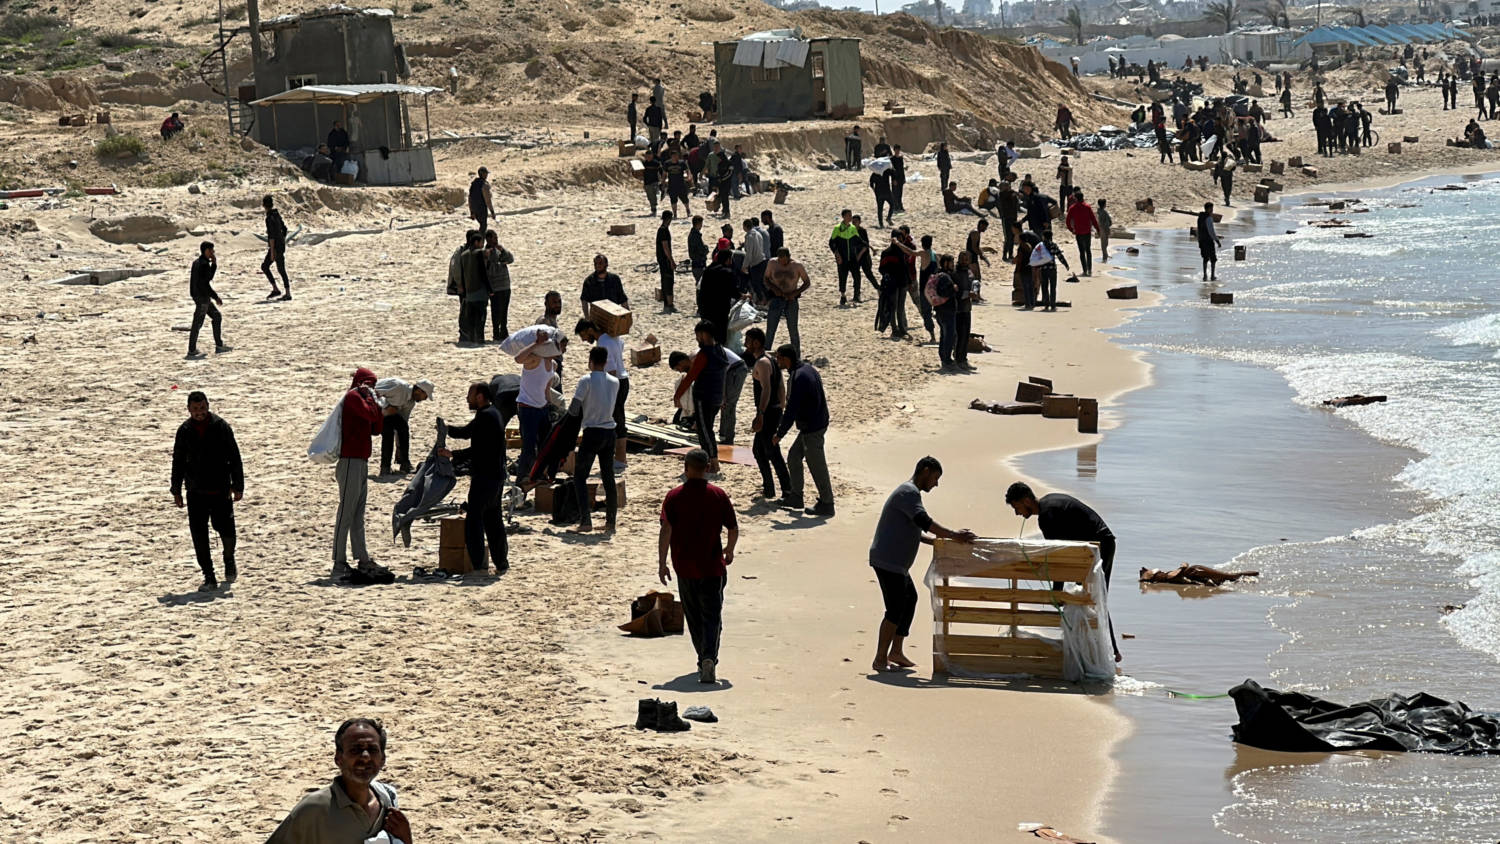 File Photo: Palestinians Gather On A Beach As They Collect Aid Airdropped By An Airplane, Amid The Ongoing Conflict Between Israel And Hamas, In The Northern Gaza Strip